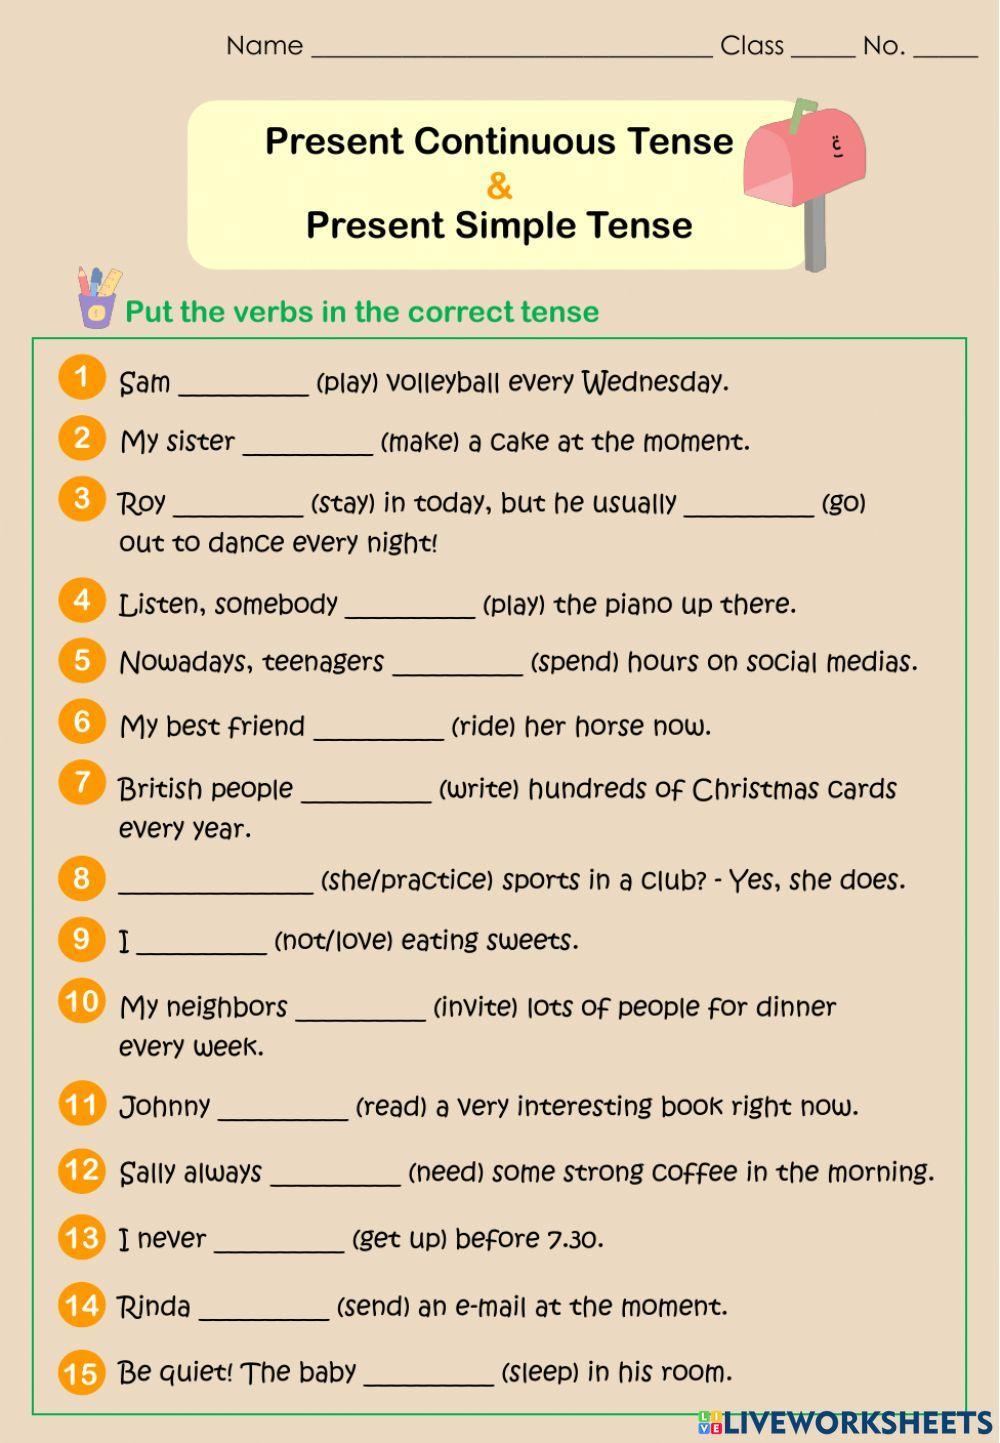 Present Continuous and Present Simple Tense worksheet | Live Worksheets